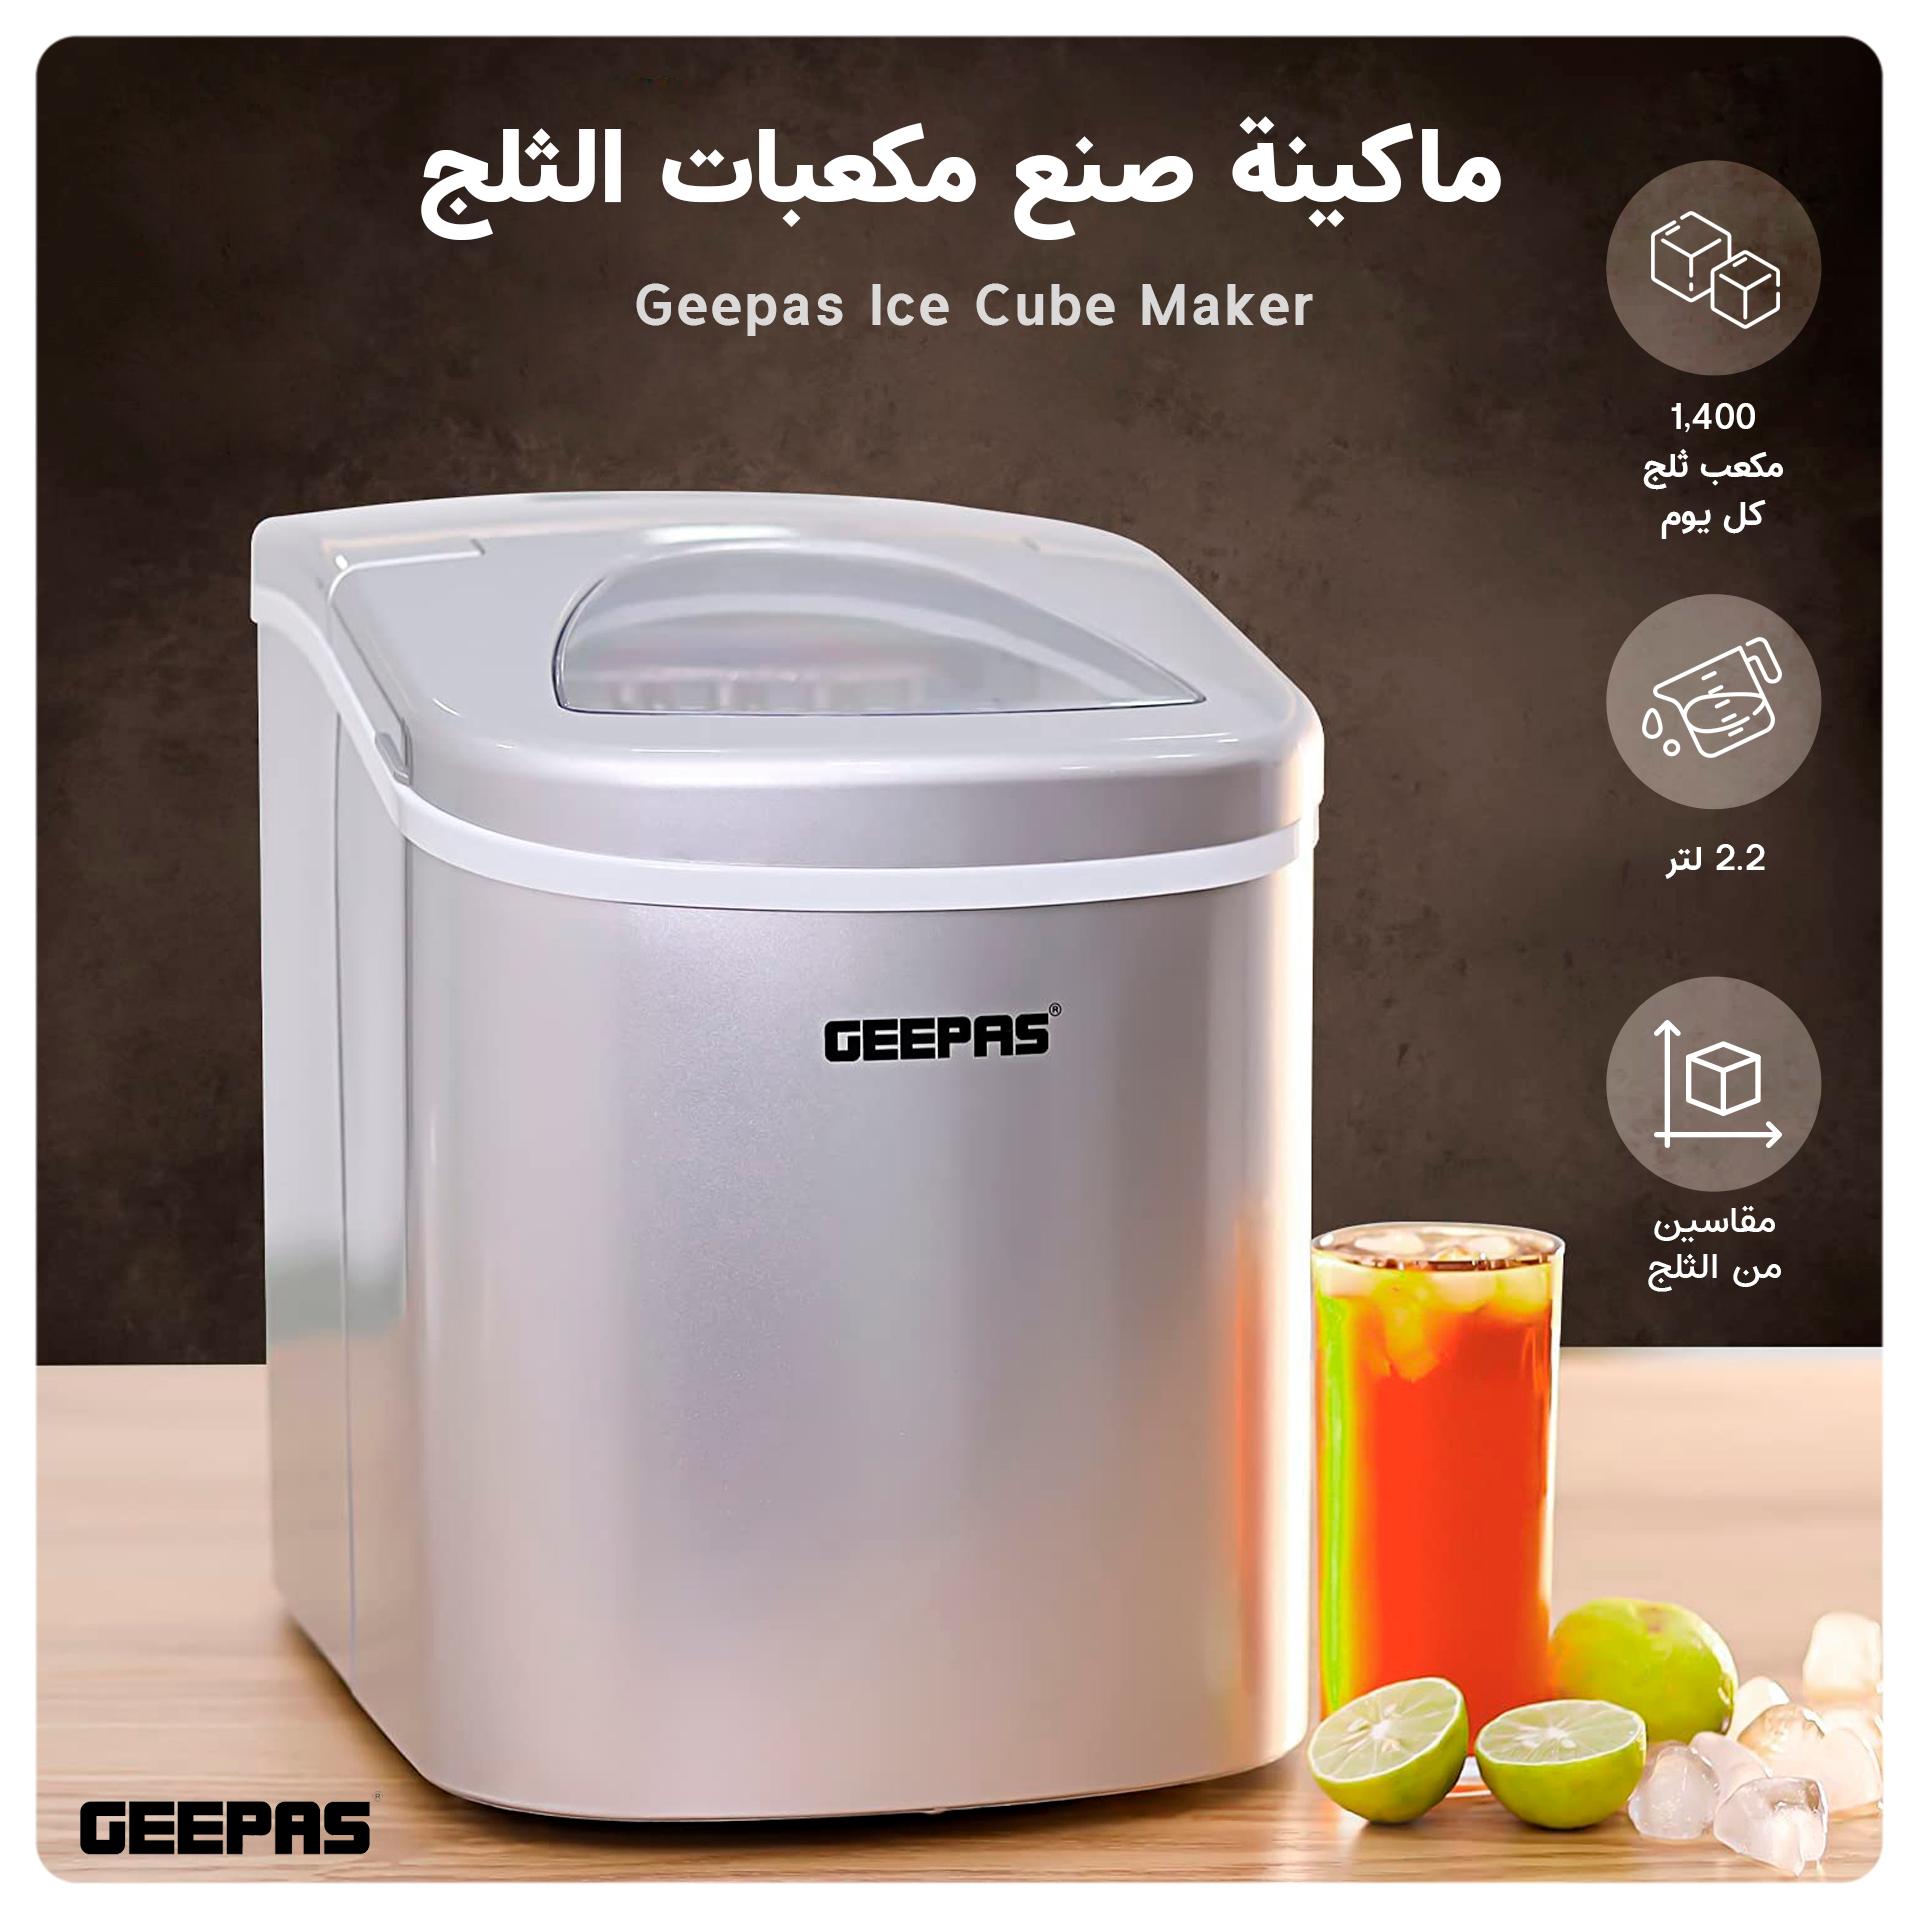 Geepas Ice Cube Maker Two Sizes Produces 24kg Ice in 24 Hours Ice Container 700g Water Container 2.2L